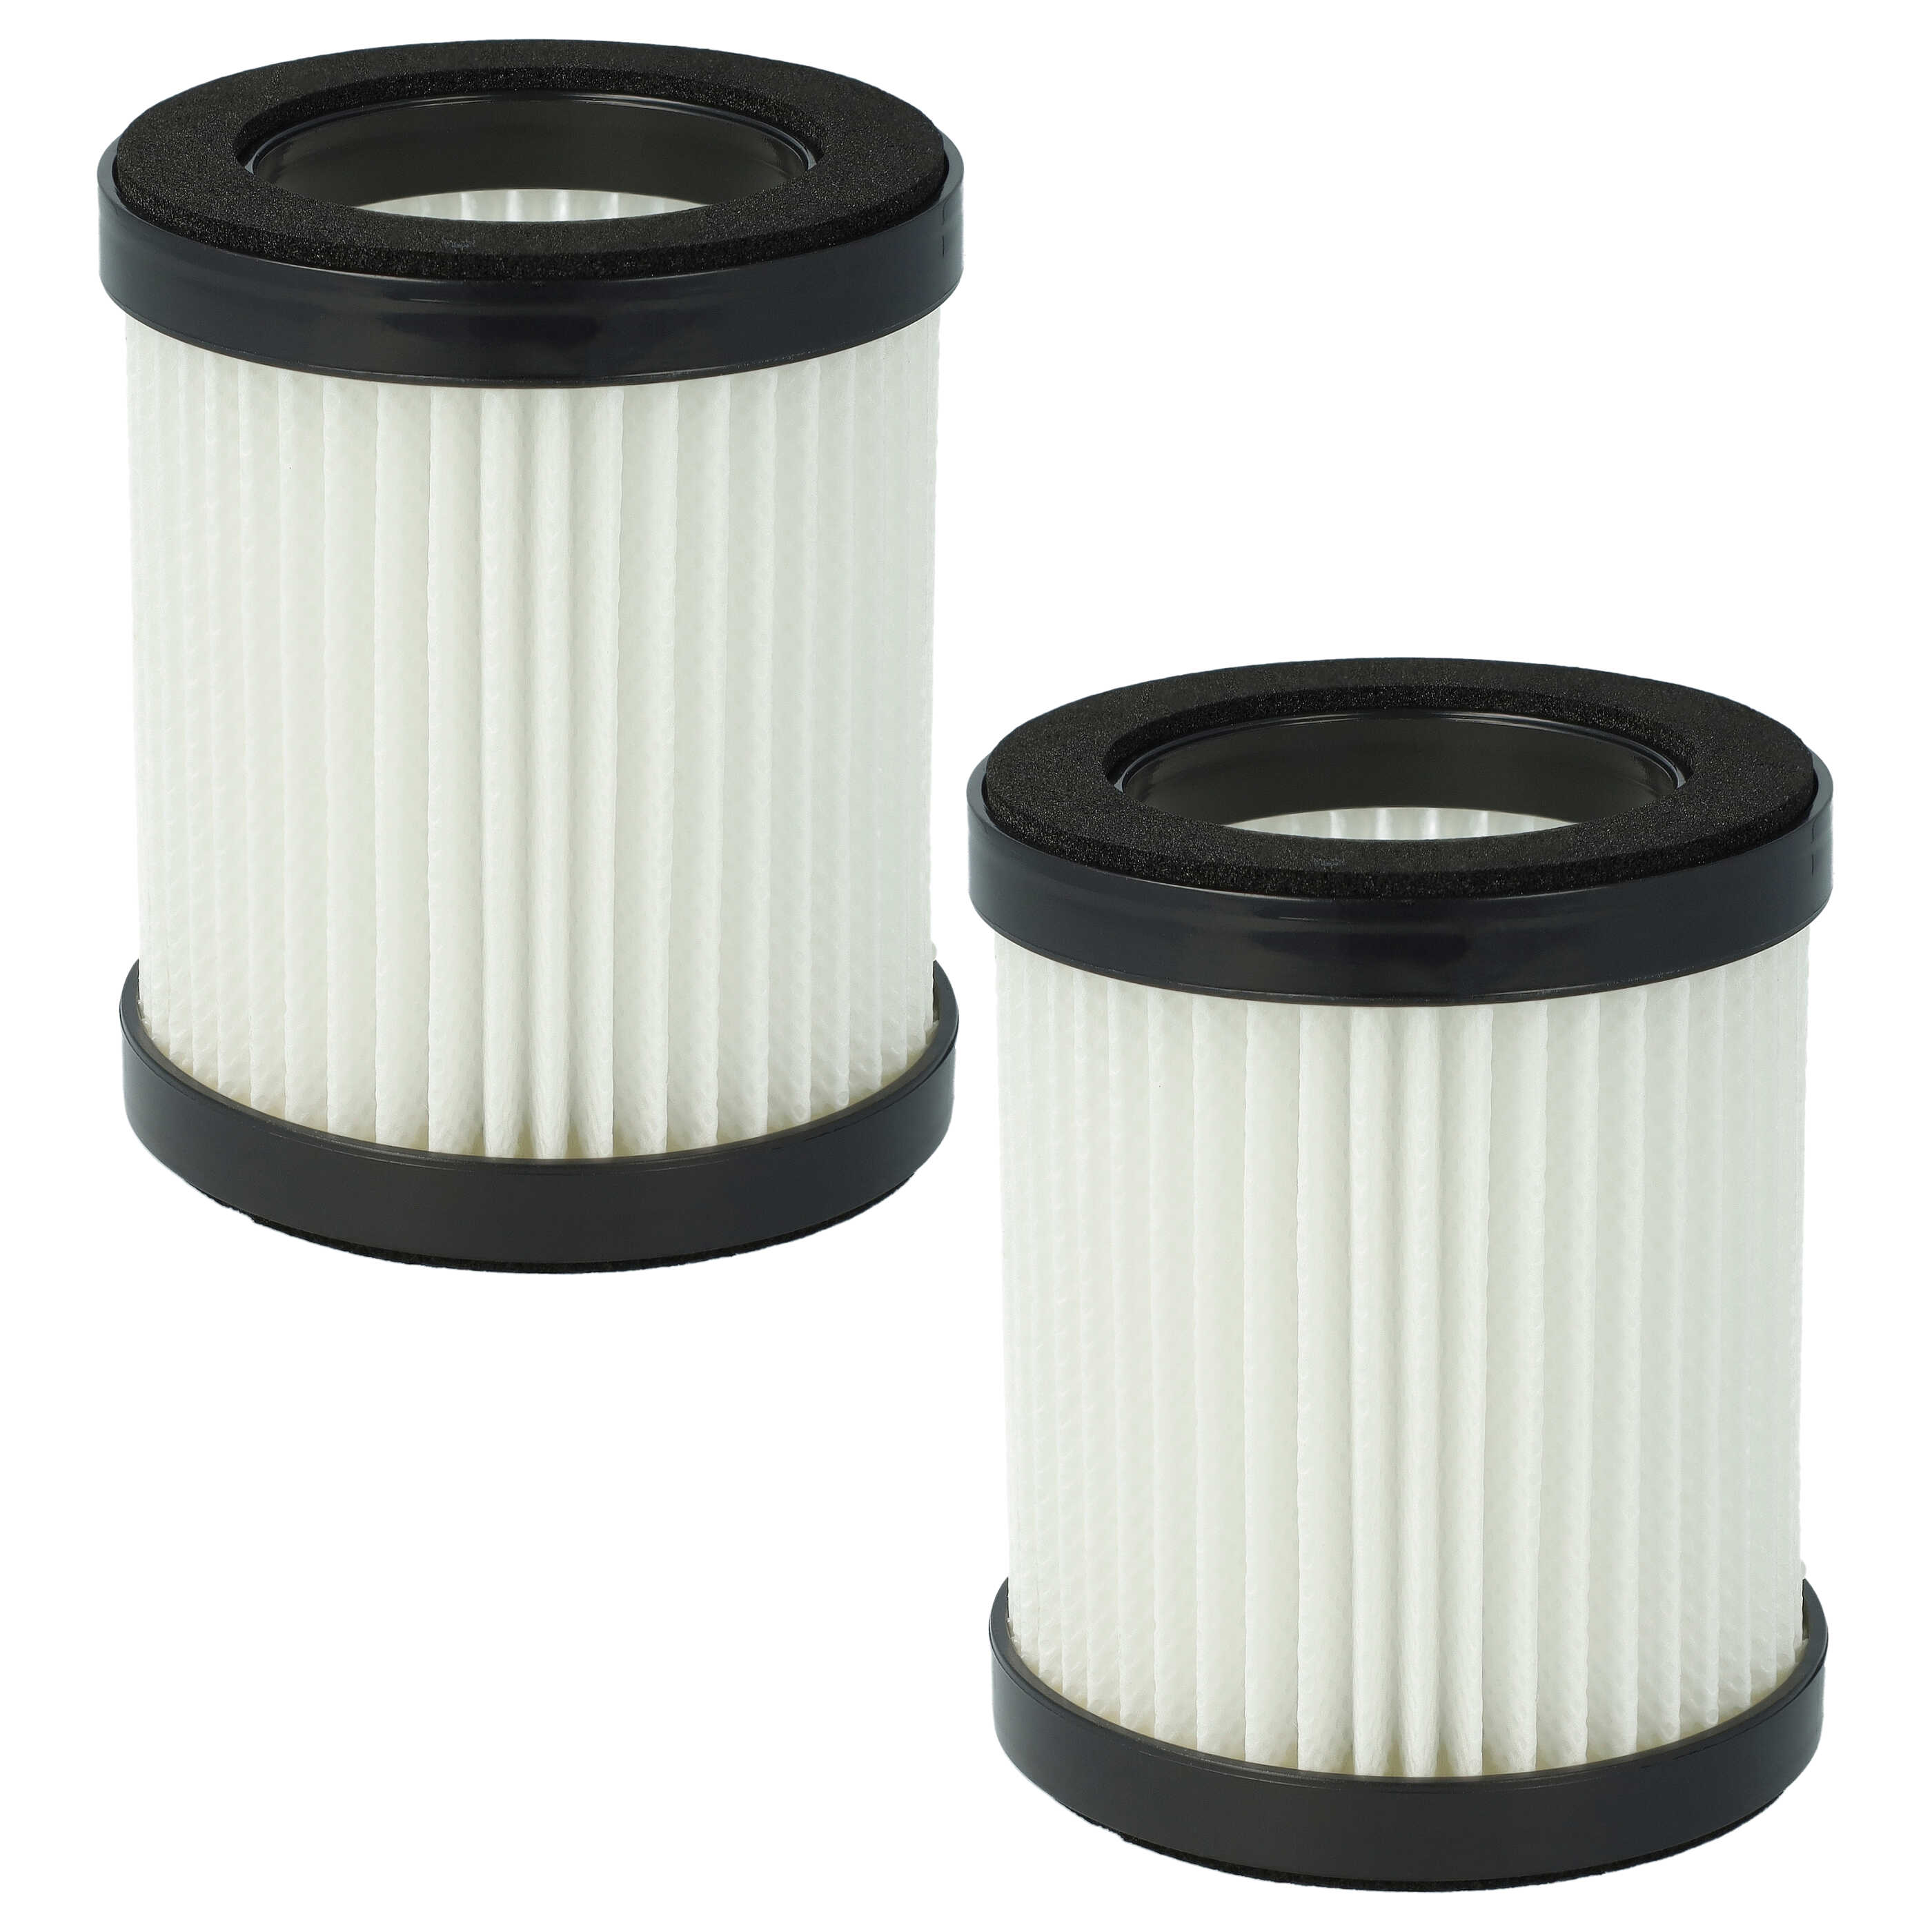 2x filter suitable for XL-618A Moosoo, Beldray XL-618A Vacuum Cleaner